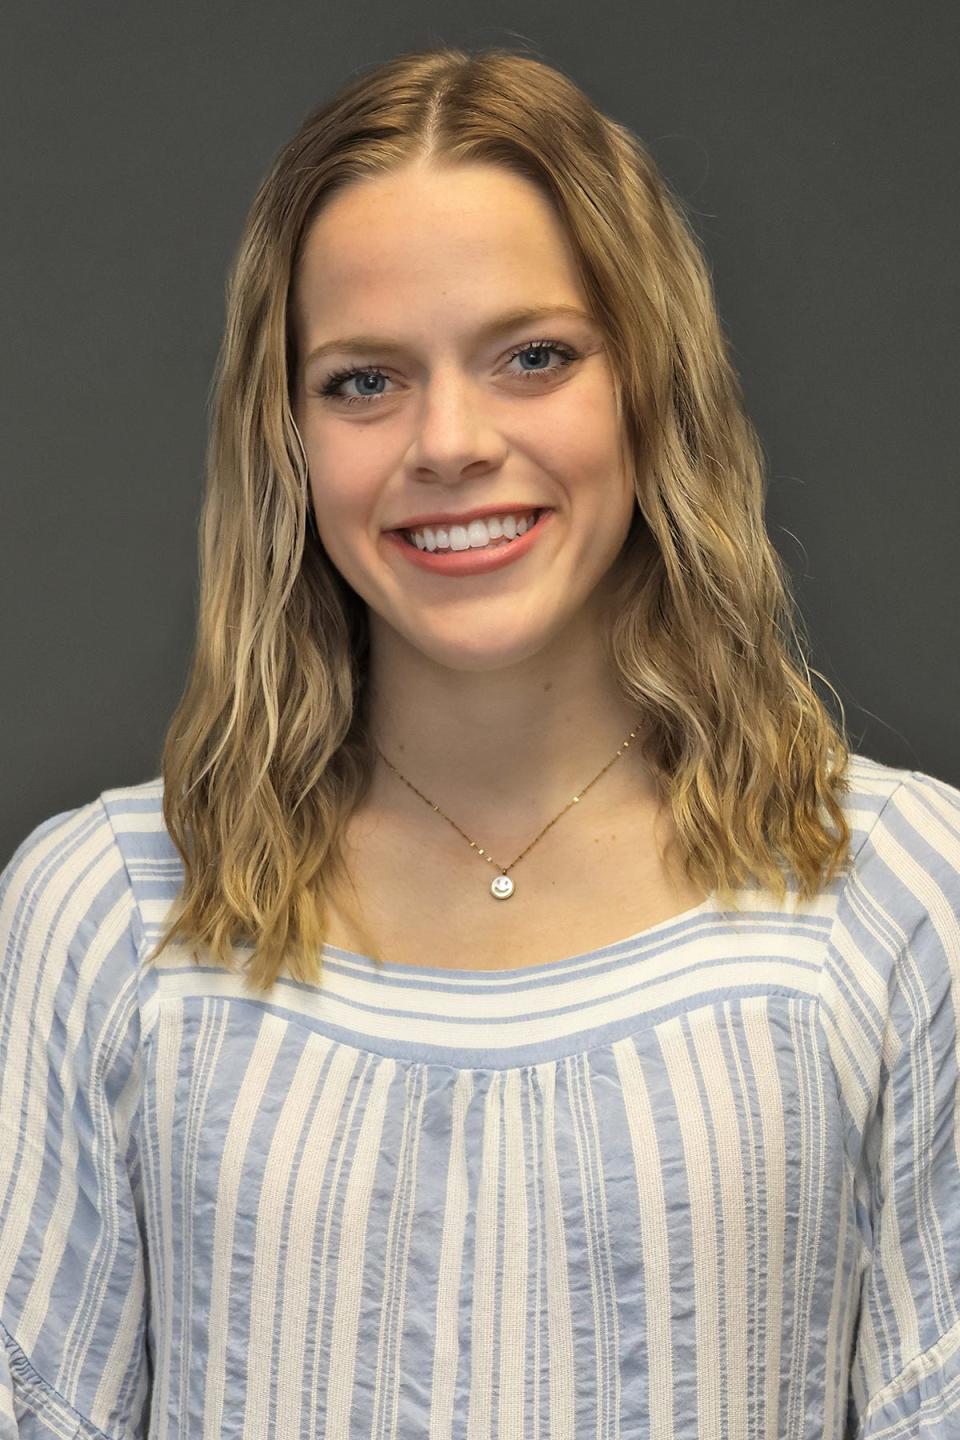 Cassidy Kretschmer of Bartelso will serve as Lincoln Land Community College's commencement speaker. The ceremony will be held at the Bank of Springfield Center on May 12.